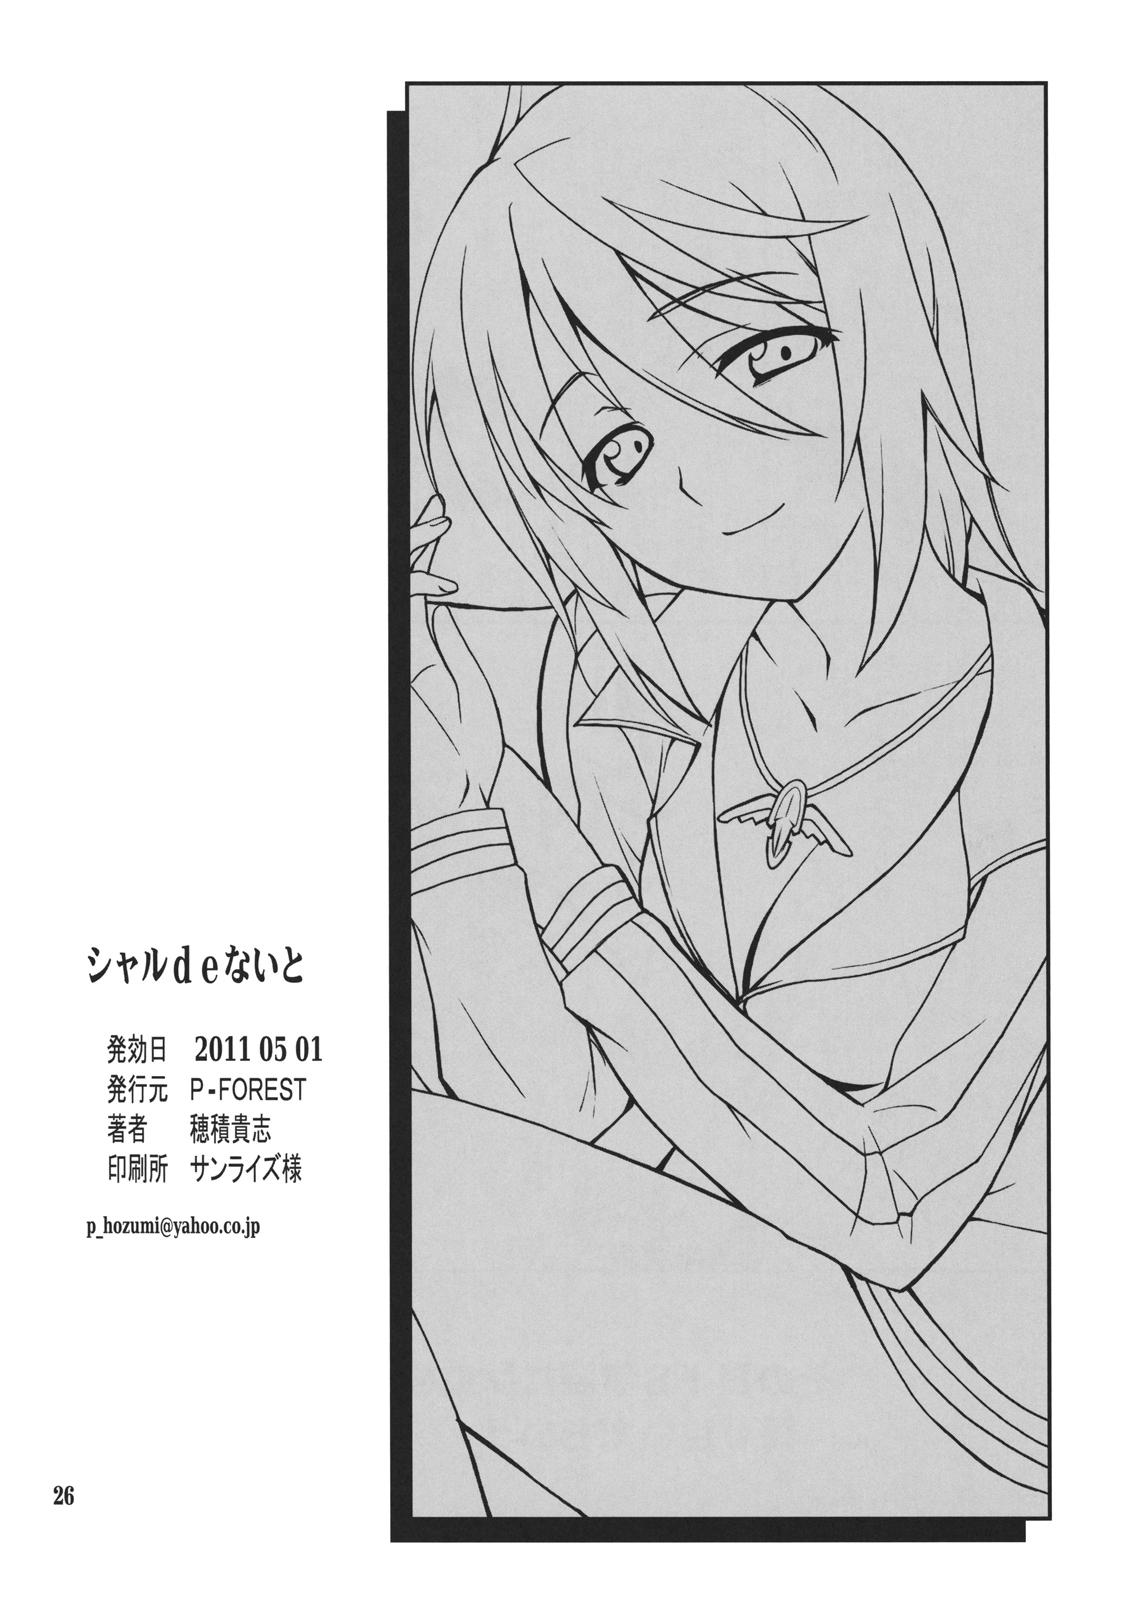 Muscle Charlotte de Night - Infinite stratos Storyline - Page 26